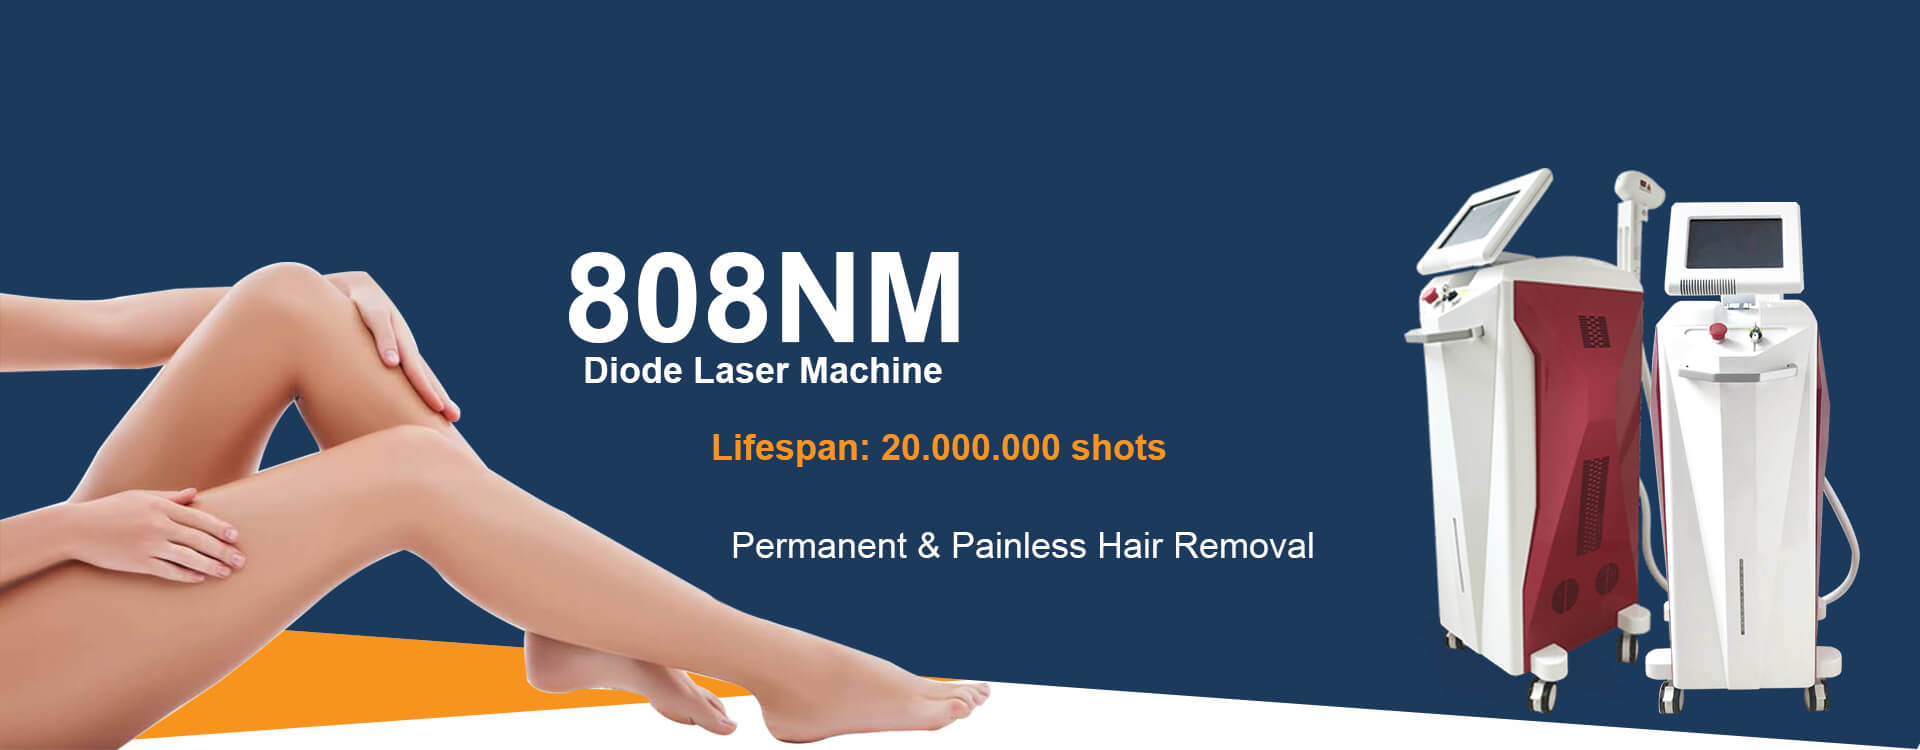 How Much Does A Professional Laser Hair Removal Machine Cost?